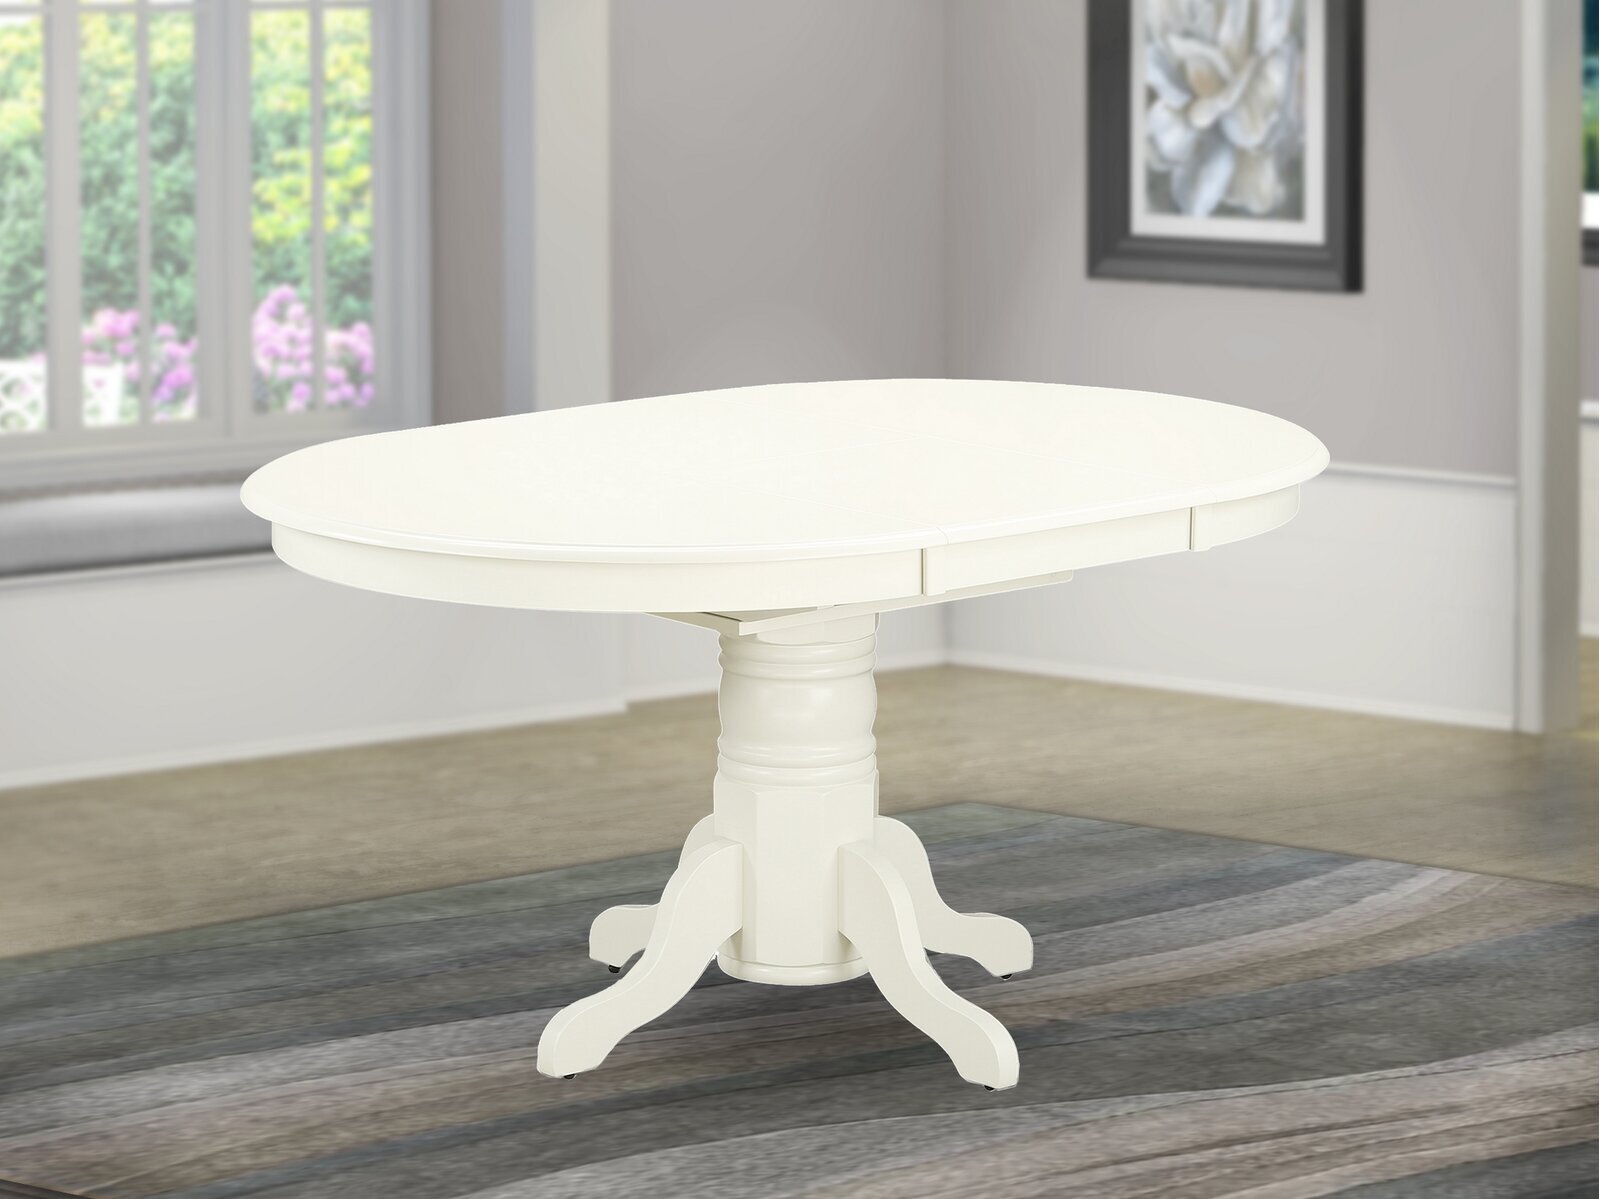 A cream or white neutral dining table with leaves that pull out